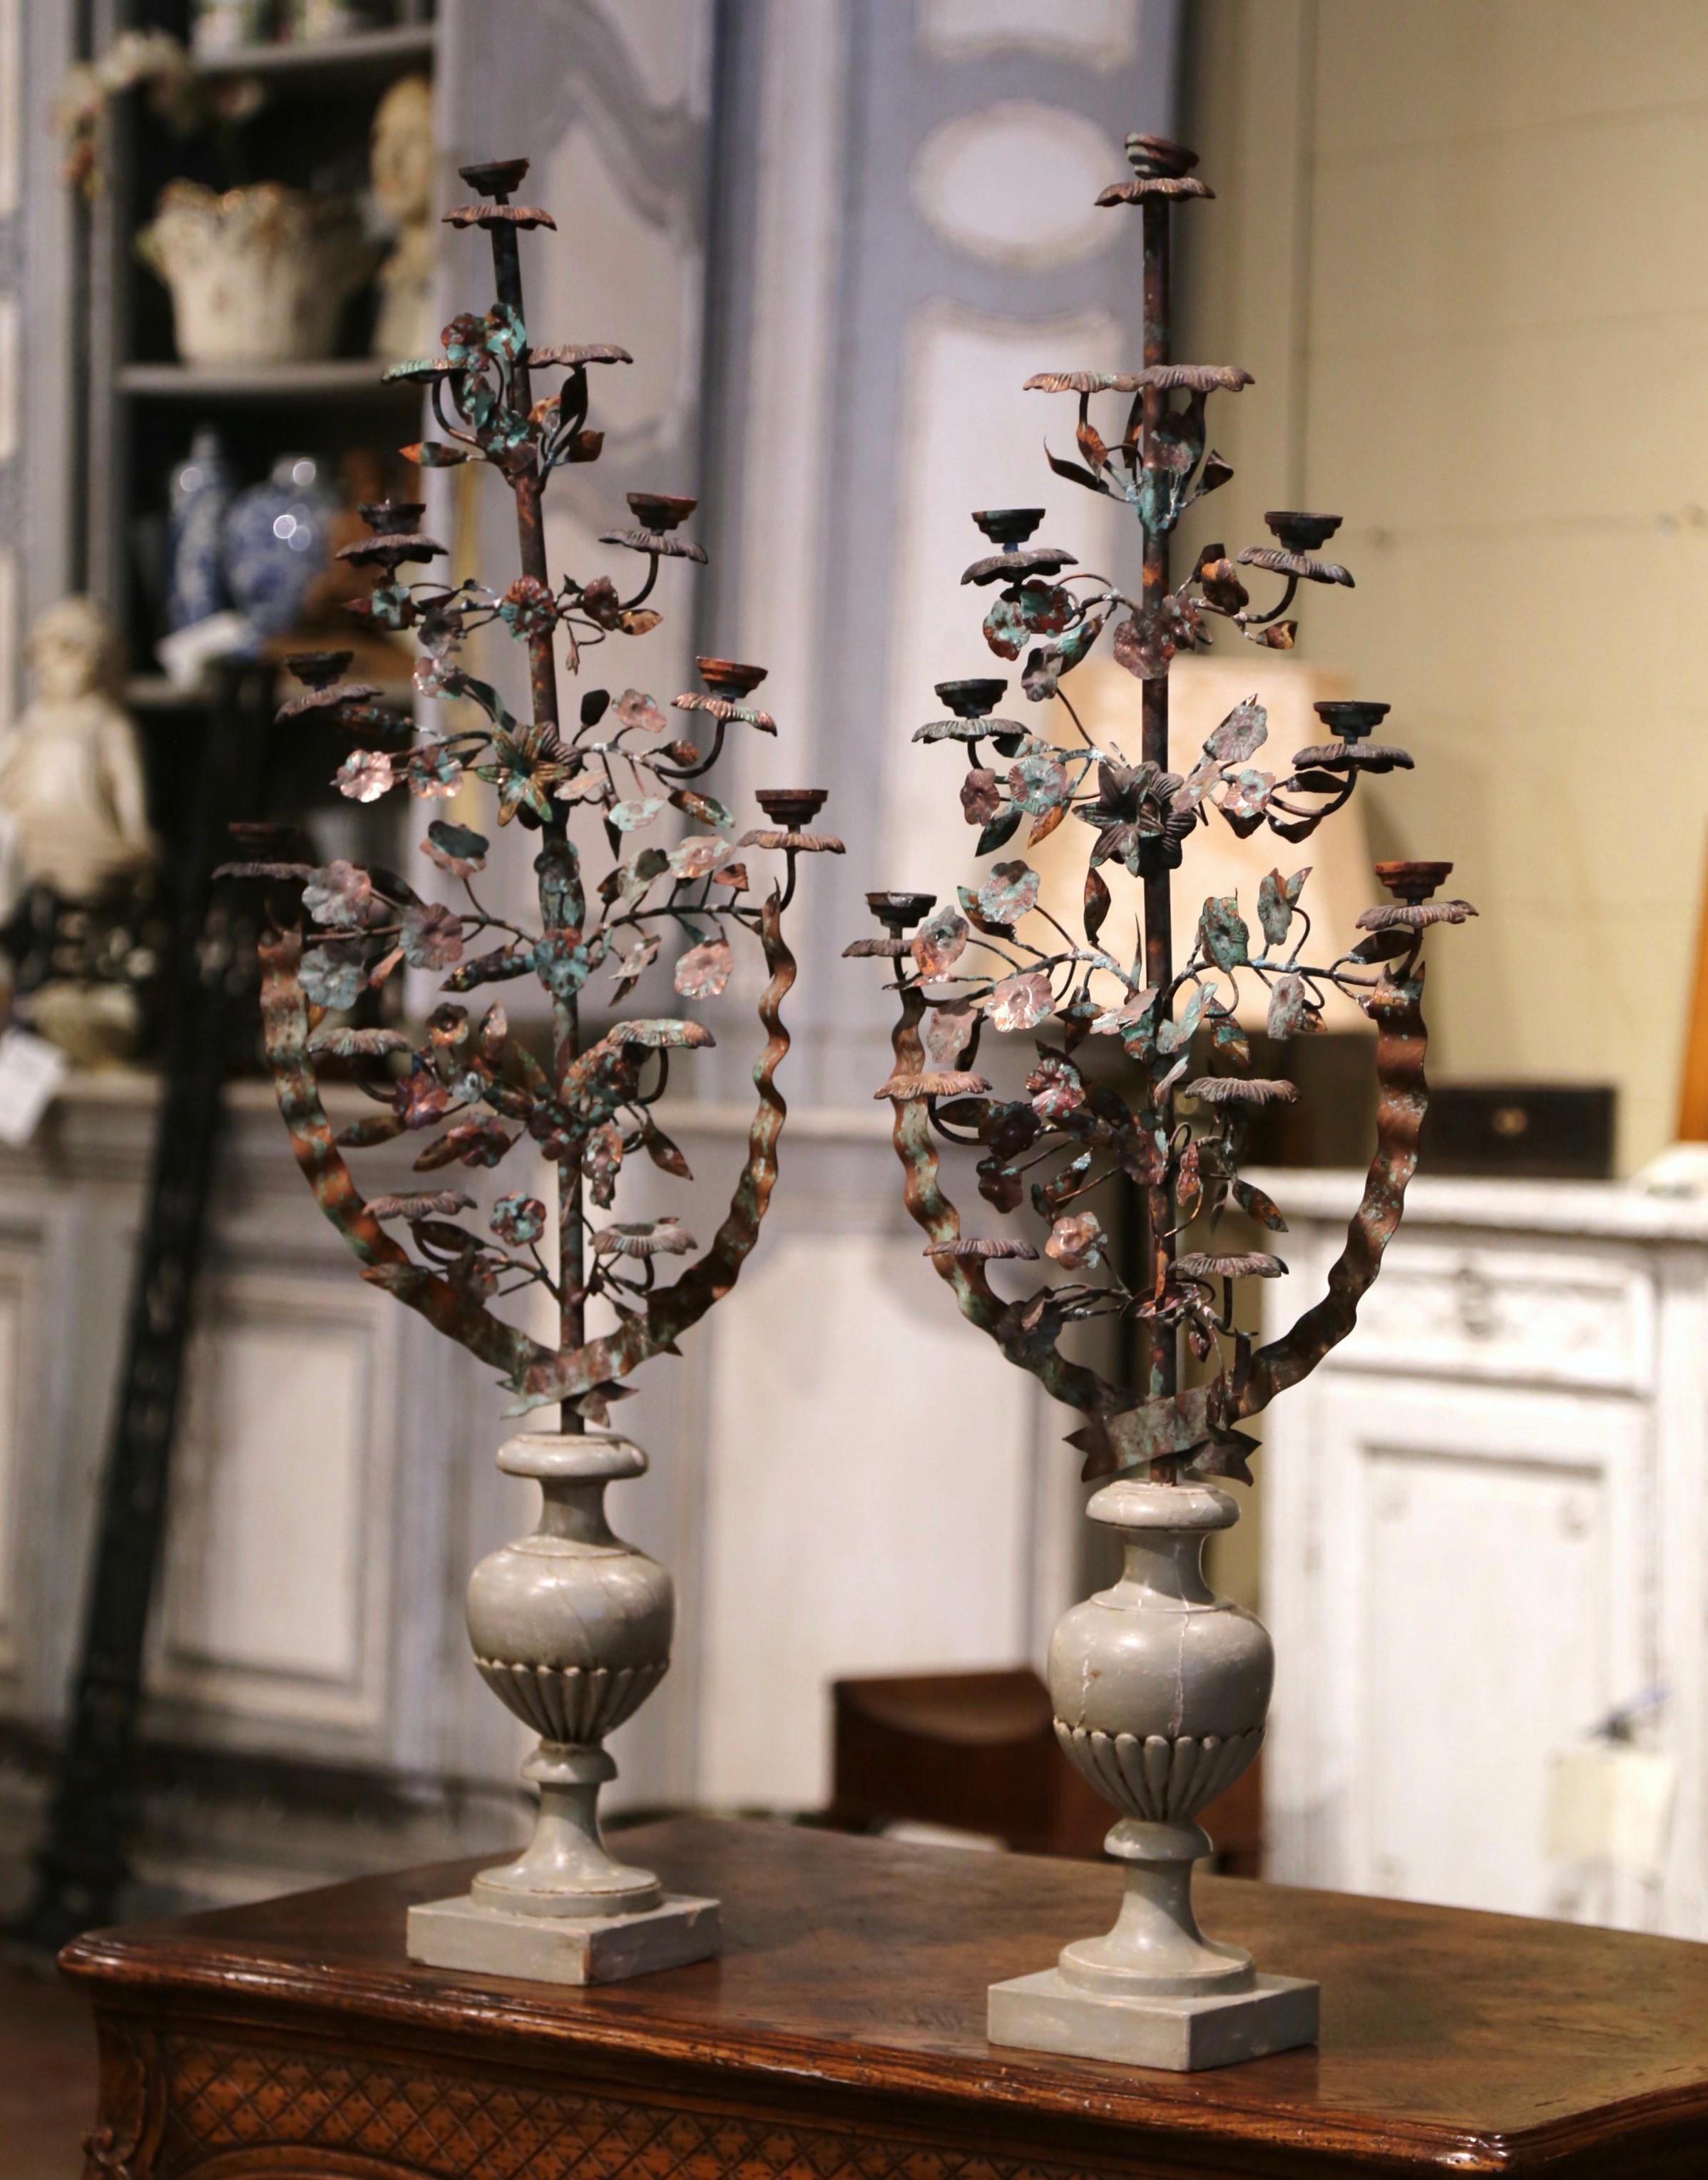 Make an elegant statement in your home with these ornate antique candelabras. Crafted in Italy, circa 1950, each candle holder stands on a urn form base, and decorated with metal flowers and leaves including seven arms to hold candles. The tall